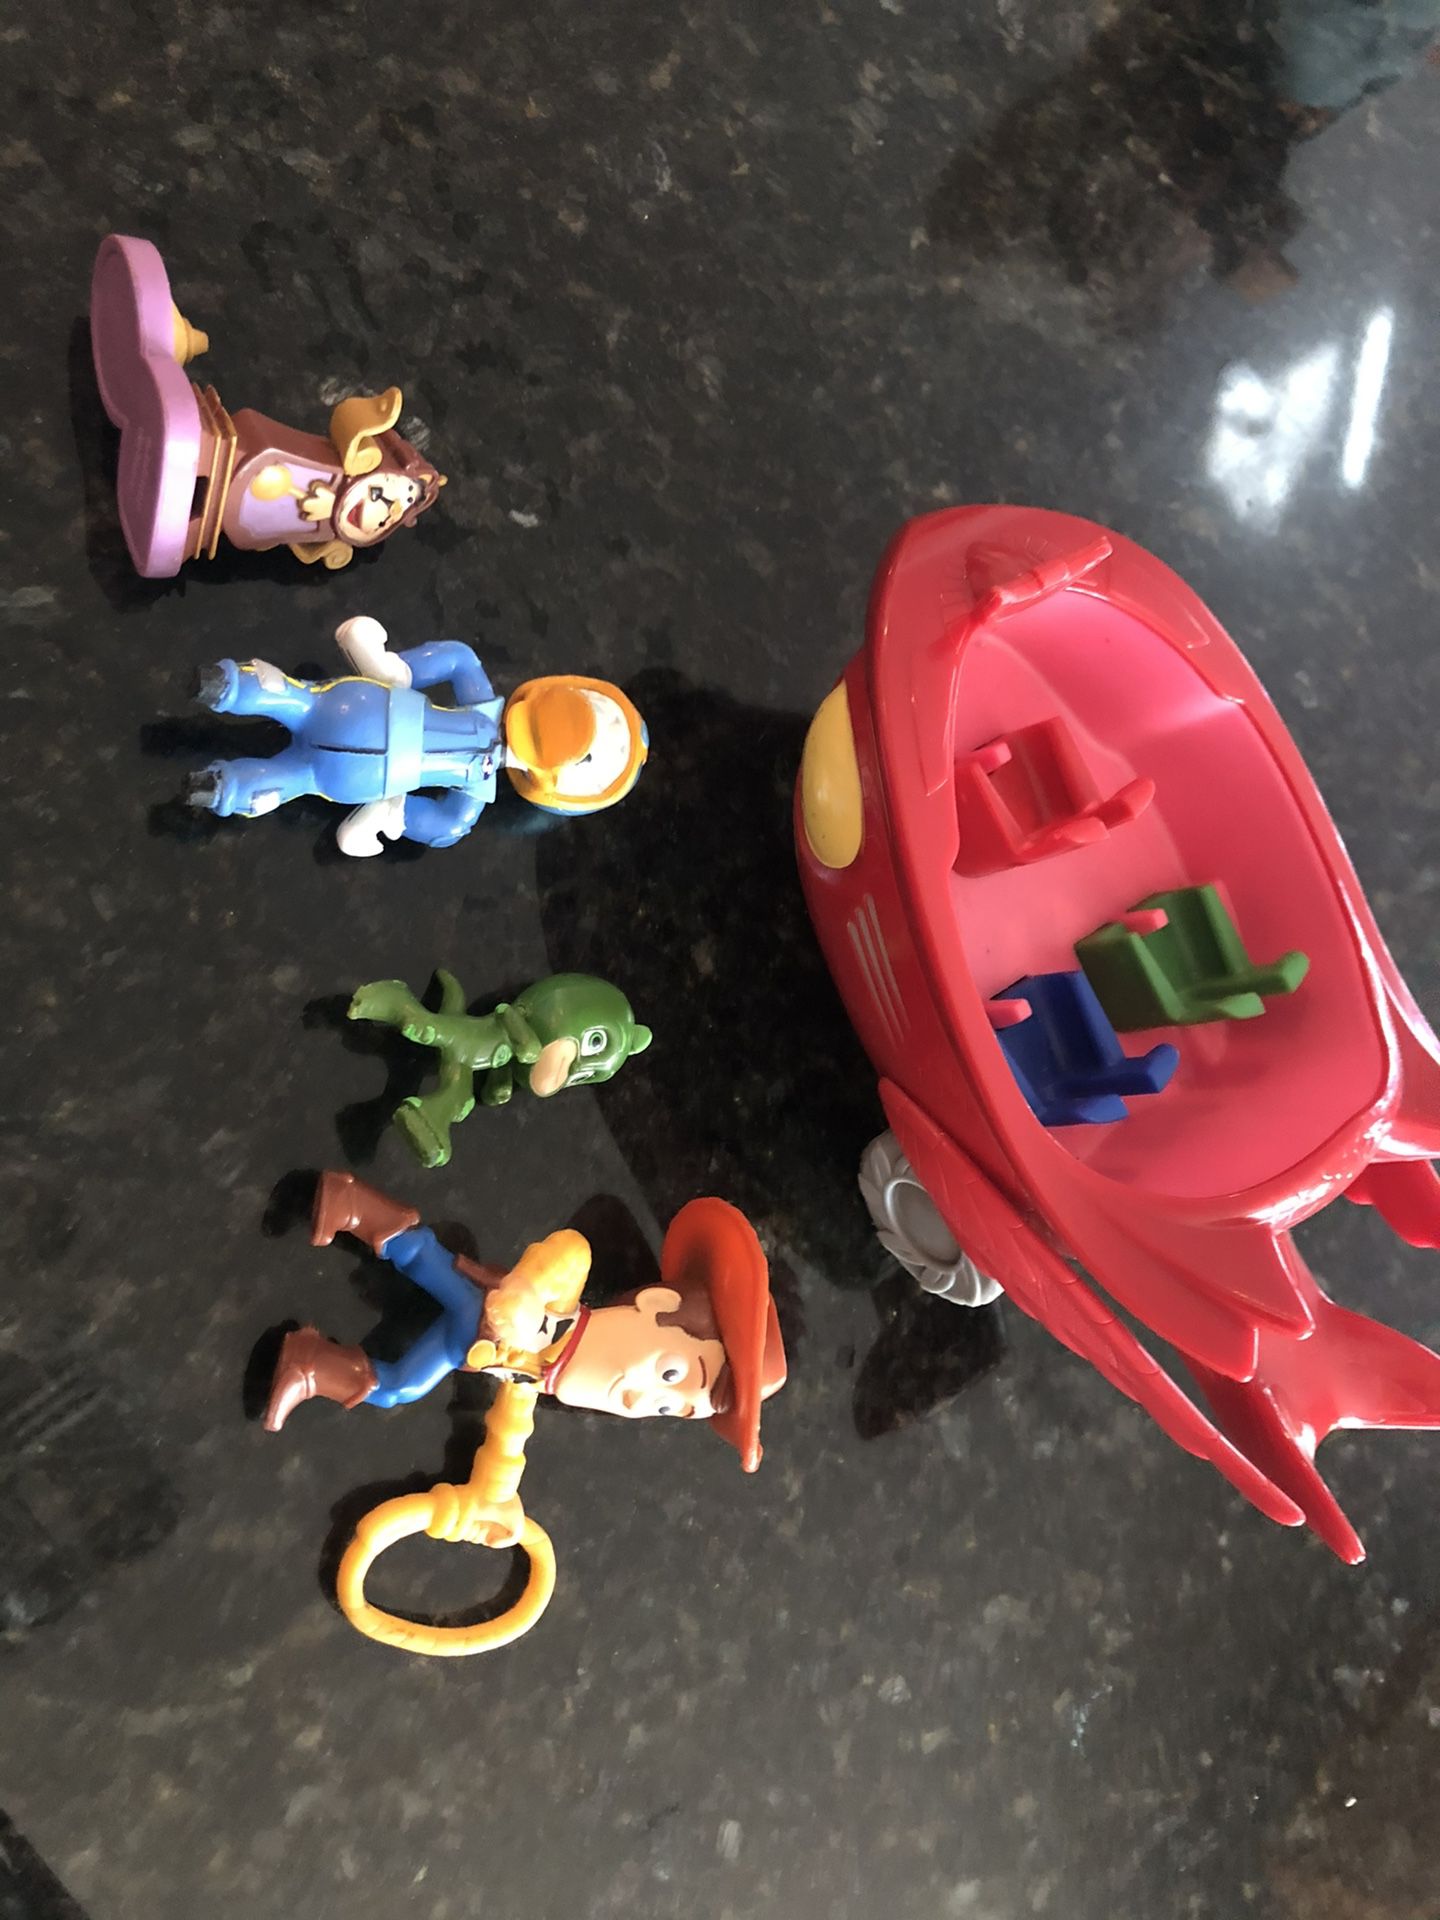 PJ masks toys and toy story and Disney